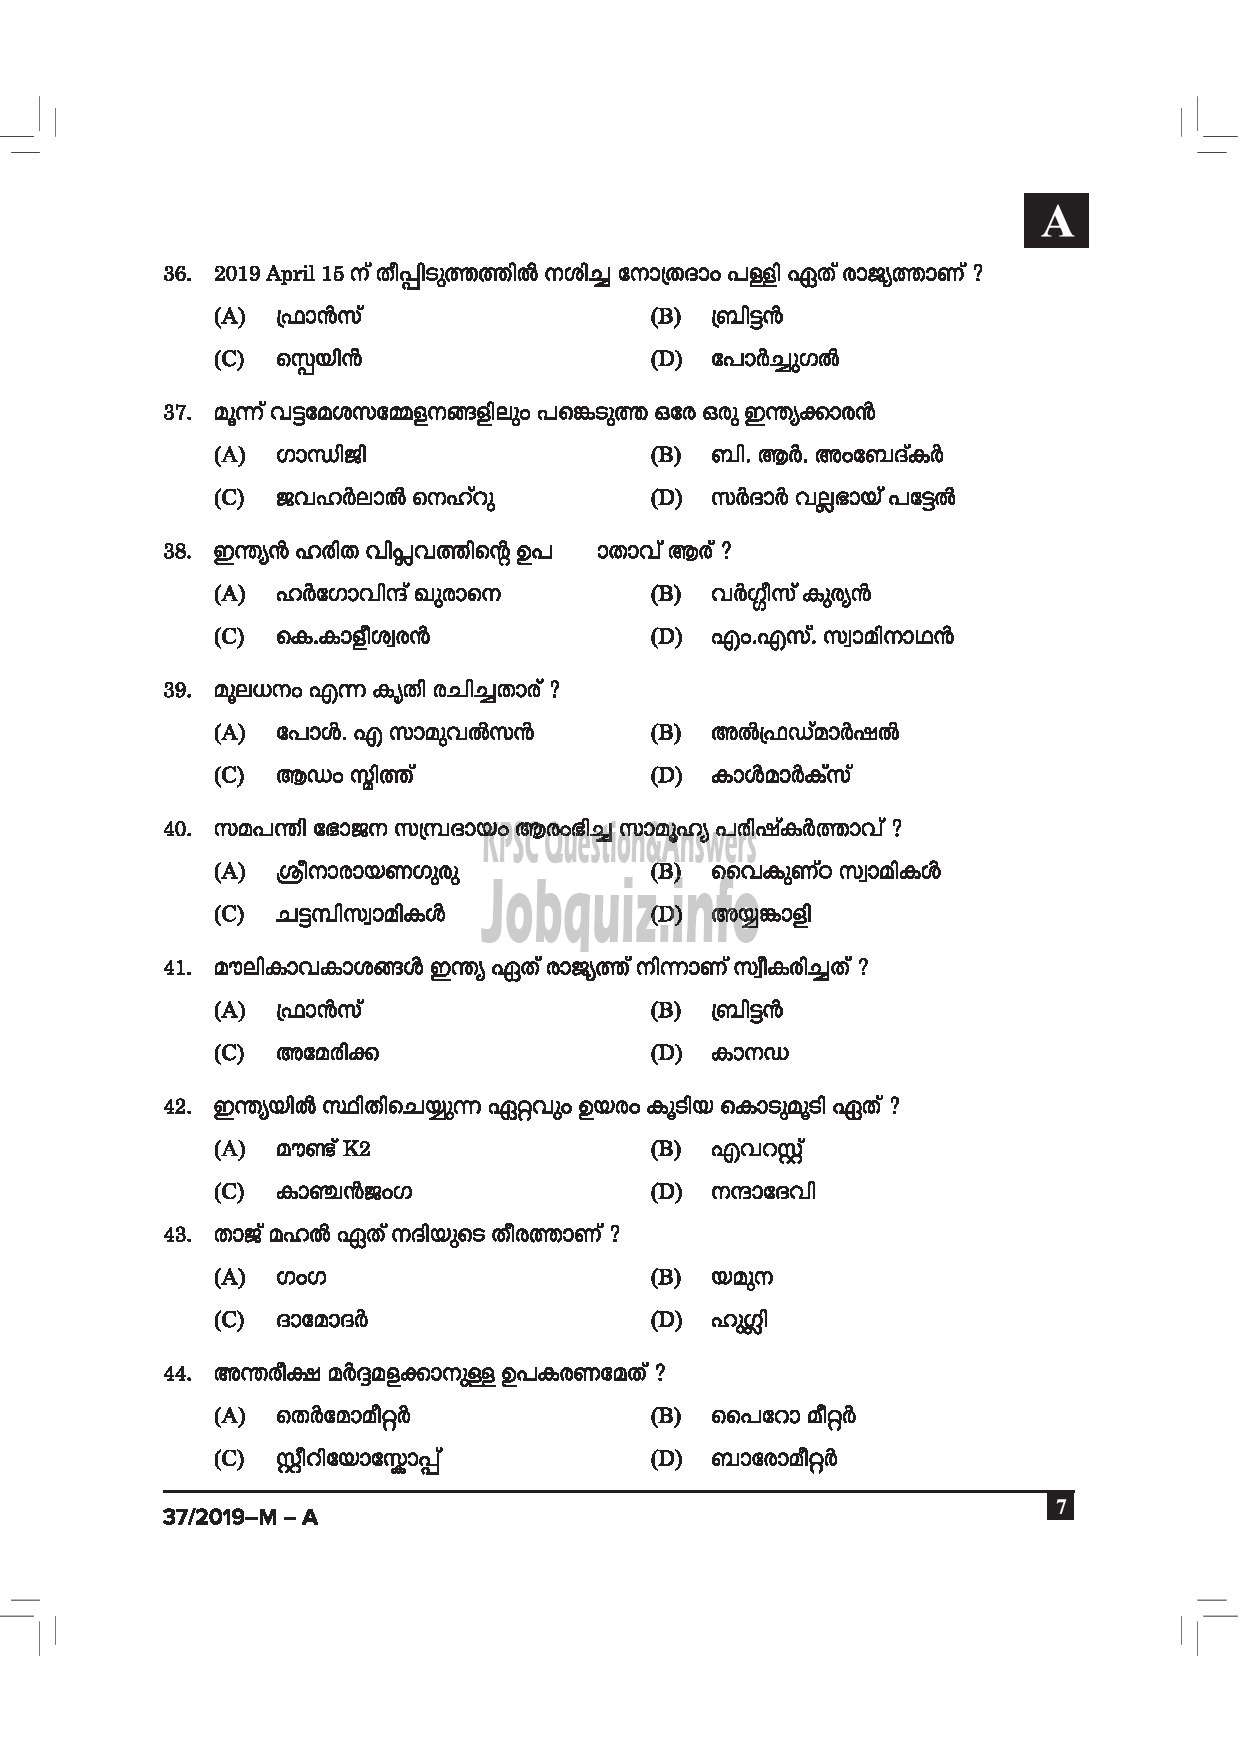 Kerala PSC Question Paper - DRIVER CUM OFFICE ATTENDANT / POLICE CONSTABLE DRIVER GOVT OWNED COMP / CORP / BOARD / POLICE MALAYALAM -7